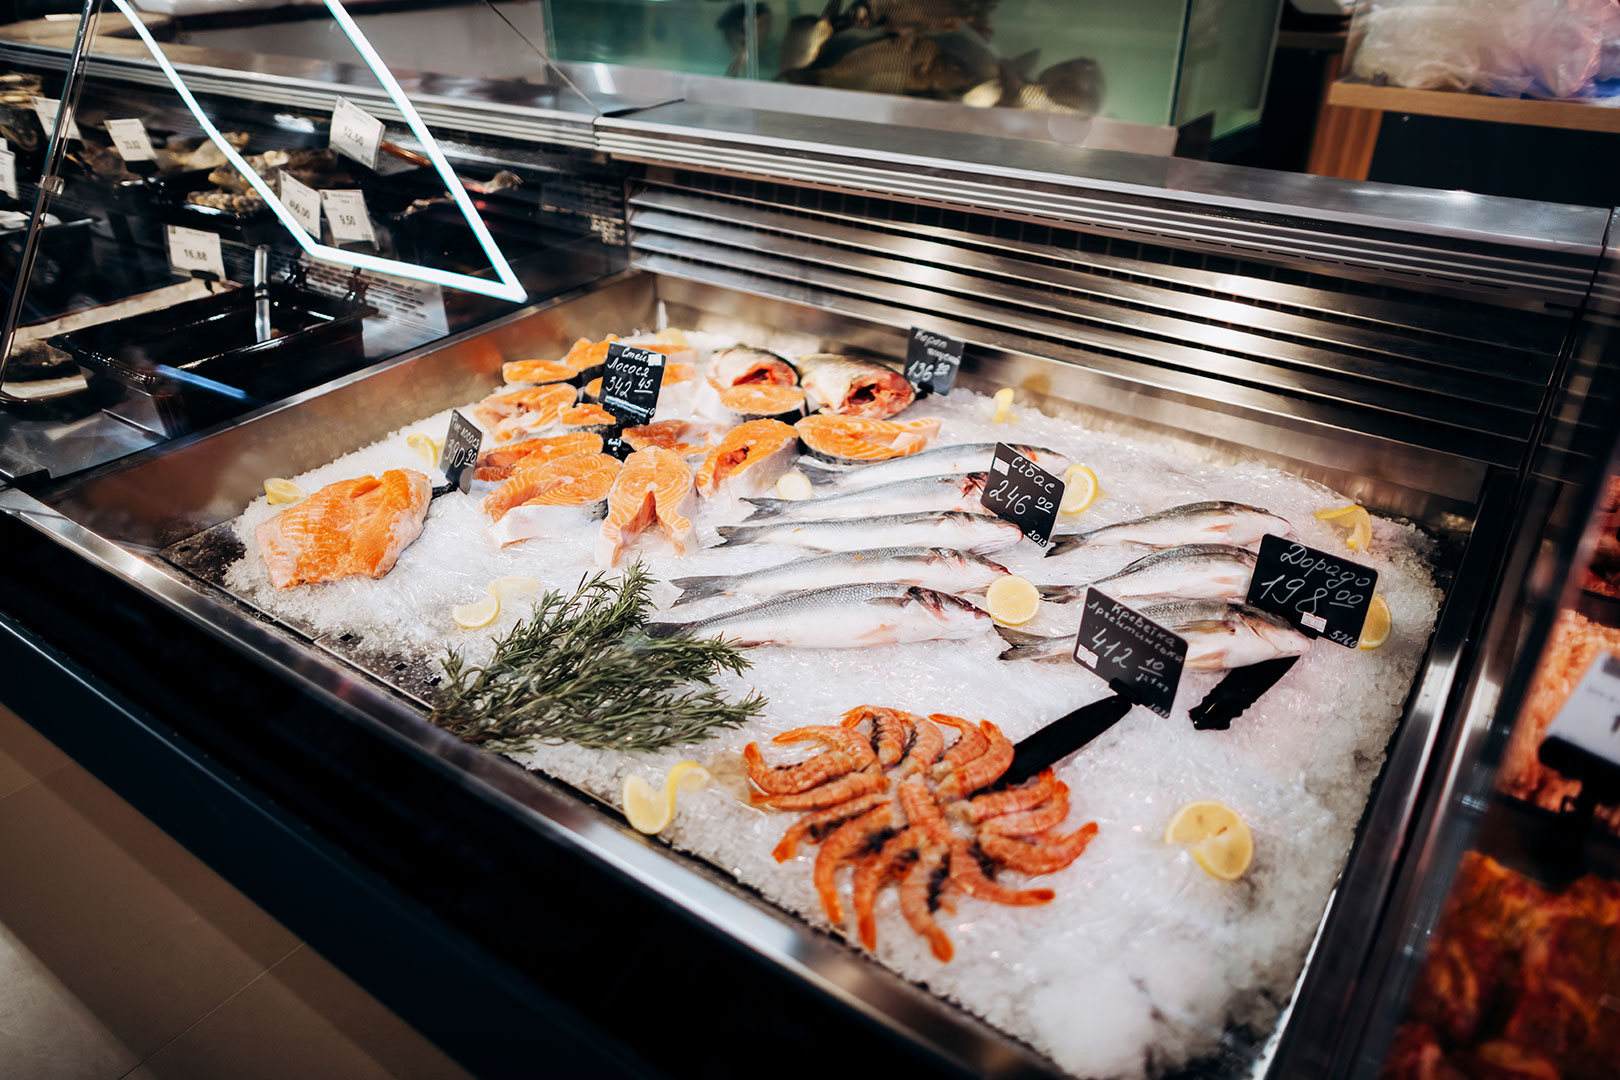 Specialized counter for fresh fish-on-ice sales Missouri enigma MK 120 fish OS M, convenient store Nash Kraii